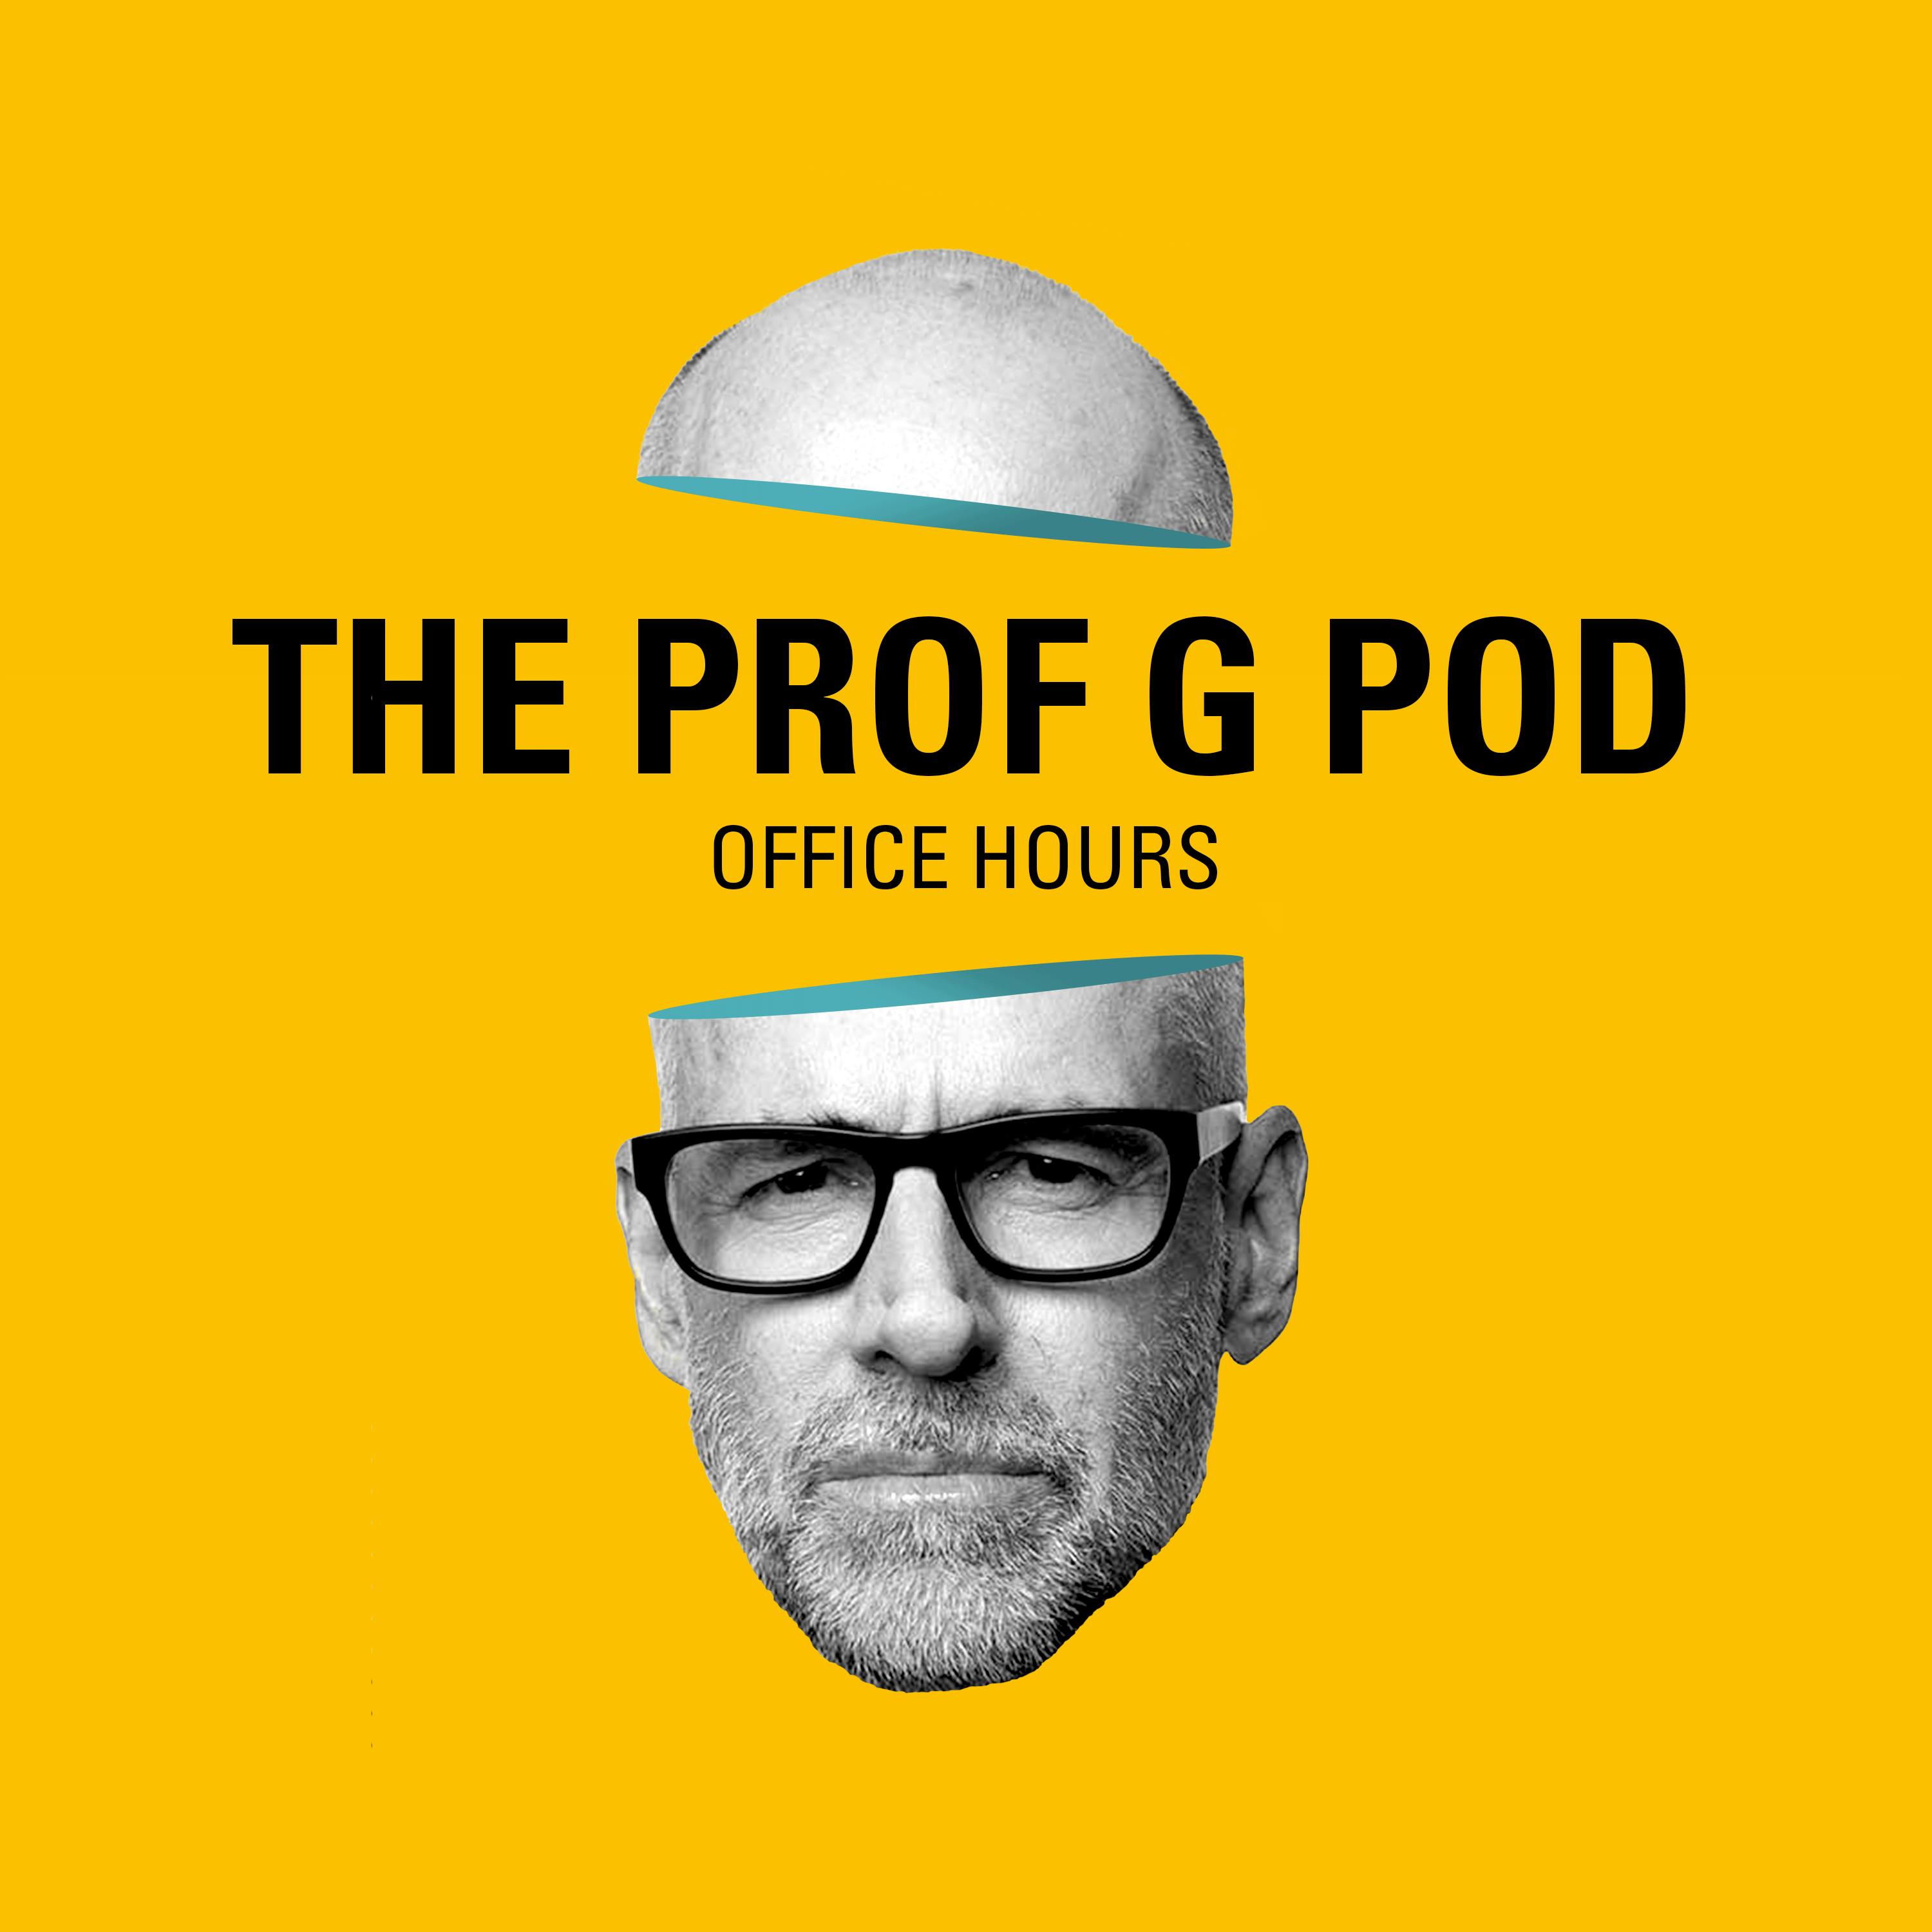 Office Hours: Why Don’t Companies Advertise on Explicit Sites? How to Negotiate Stock Options with an Employer, and How Scott Built a Public Speaking Career